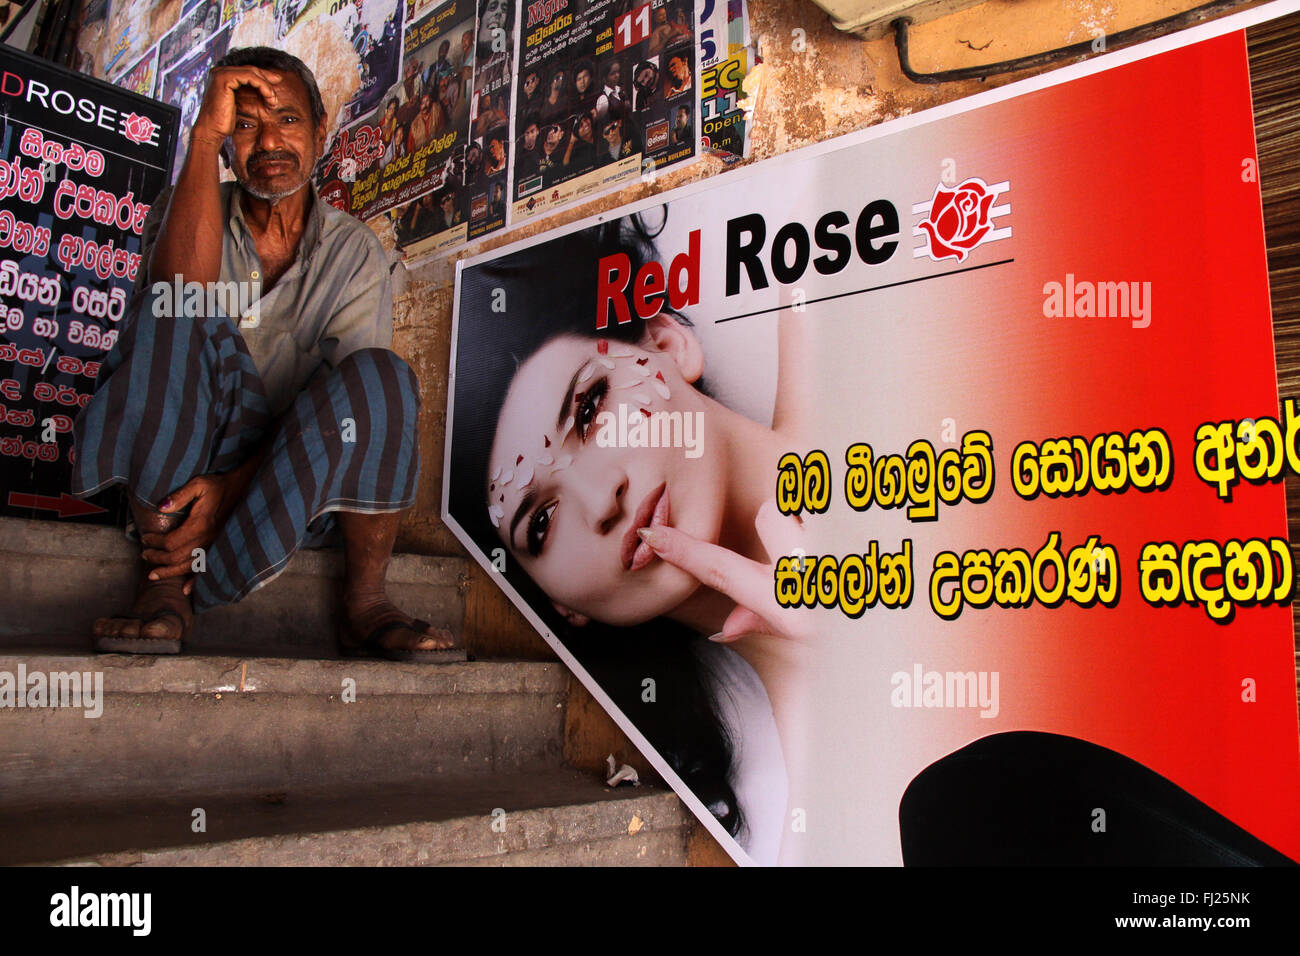 Man sits alone on stairs with woman poster on the wall in Kandy , Sri Lanka Stock Photo